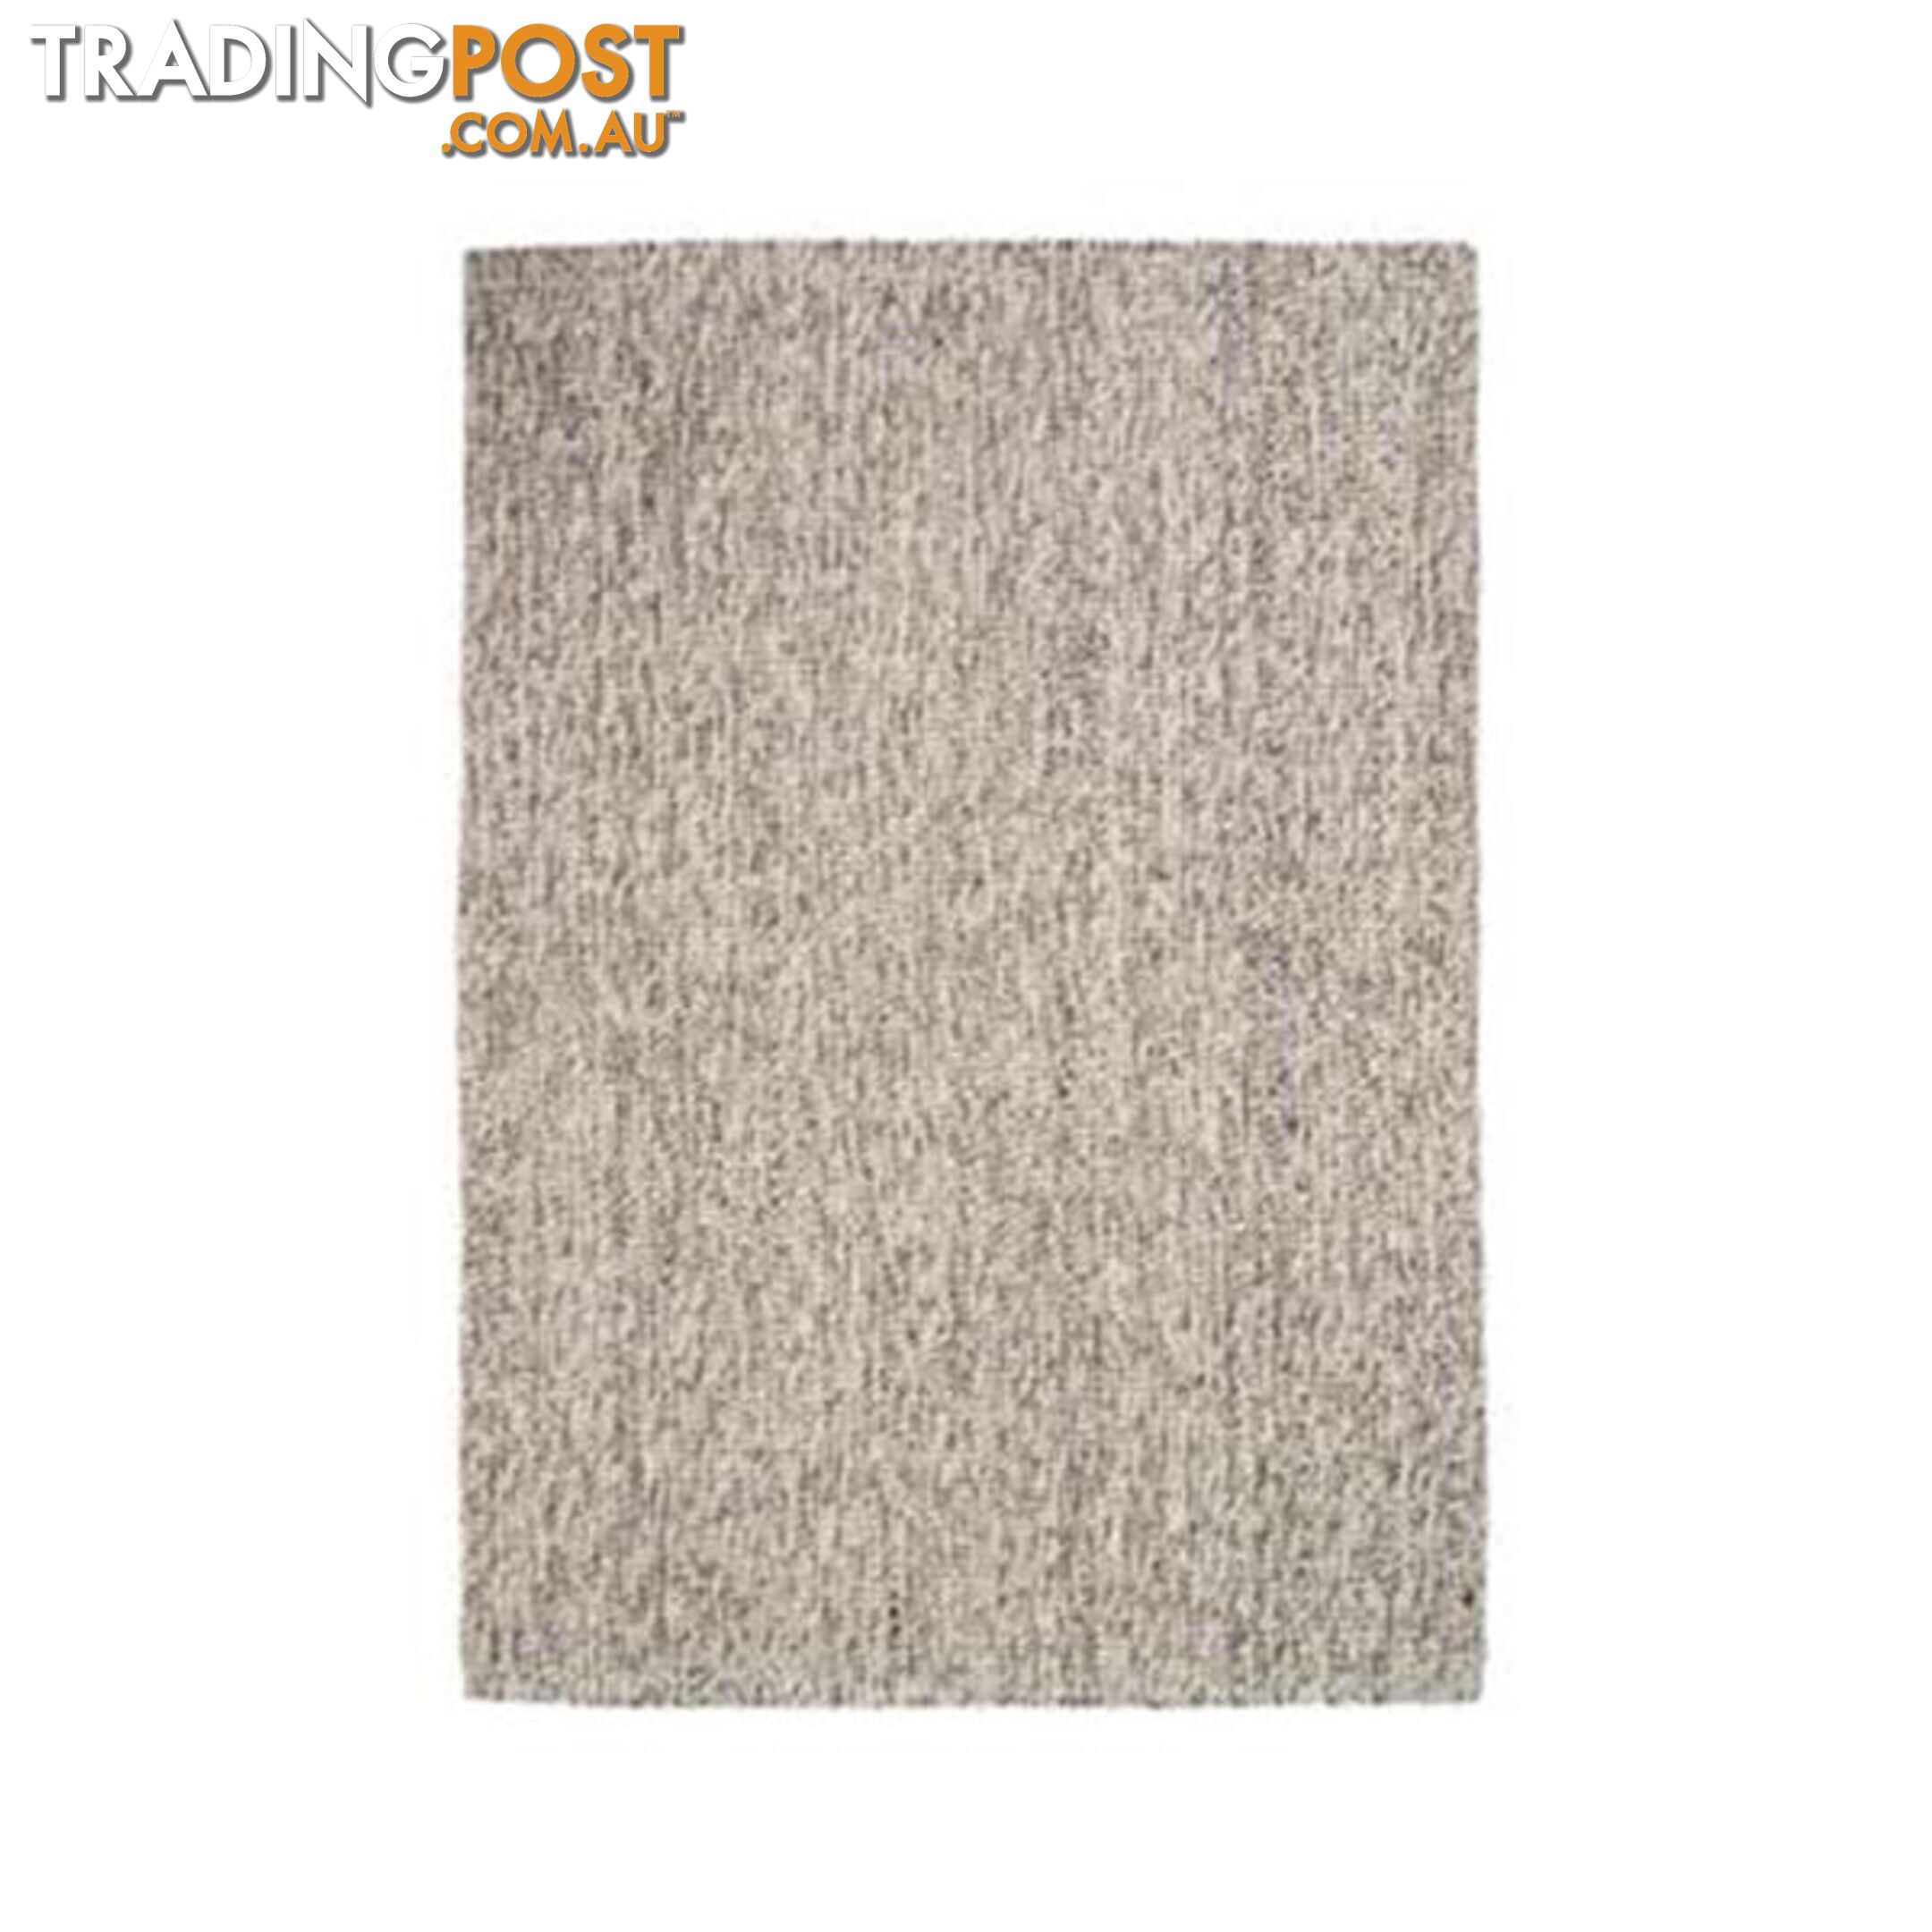 Handwoven Orion Silver Rug - Unbranded - 7427046183932